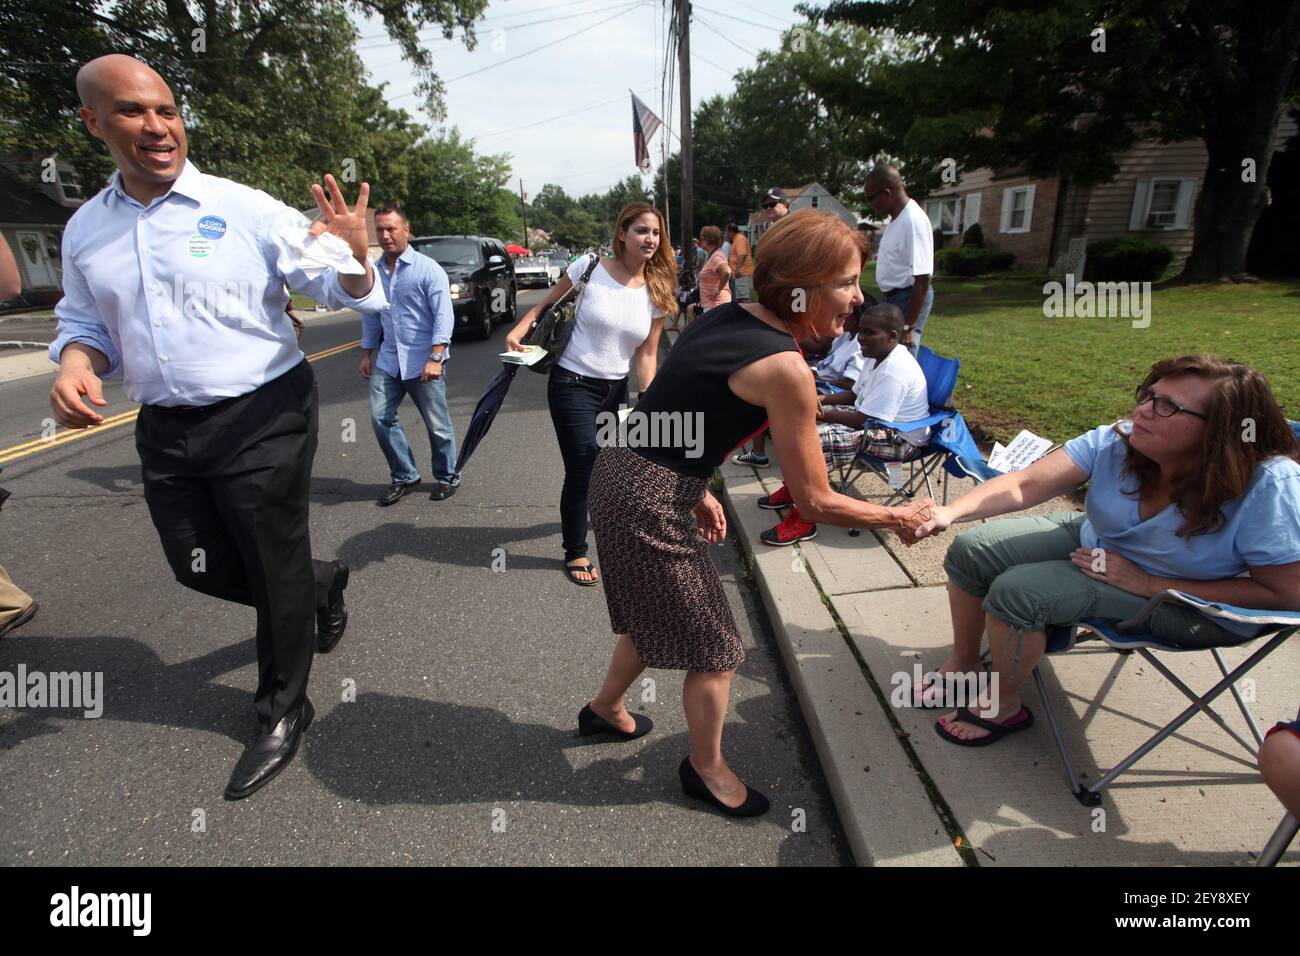 September 2, 2013; South Plainfield, NJ, USA; Candidates for elected office came to the South Plainfield annual Labor Day Parade to campaign for votes. Cory Booker following candidate for Governor Barbara Buono along the parade route. Mandatory Credit: Chris Pedota/The Record via USA TODAY NETWORK/Sipa USA Stock Photo